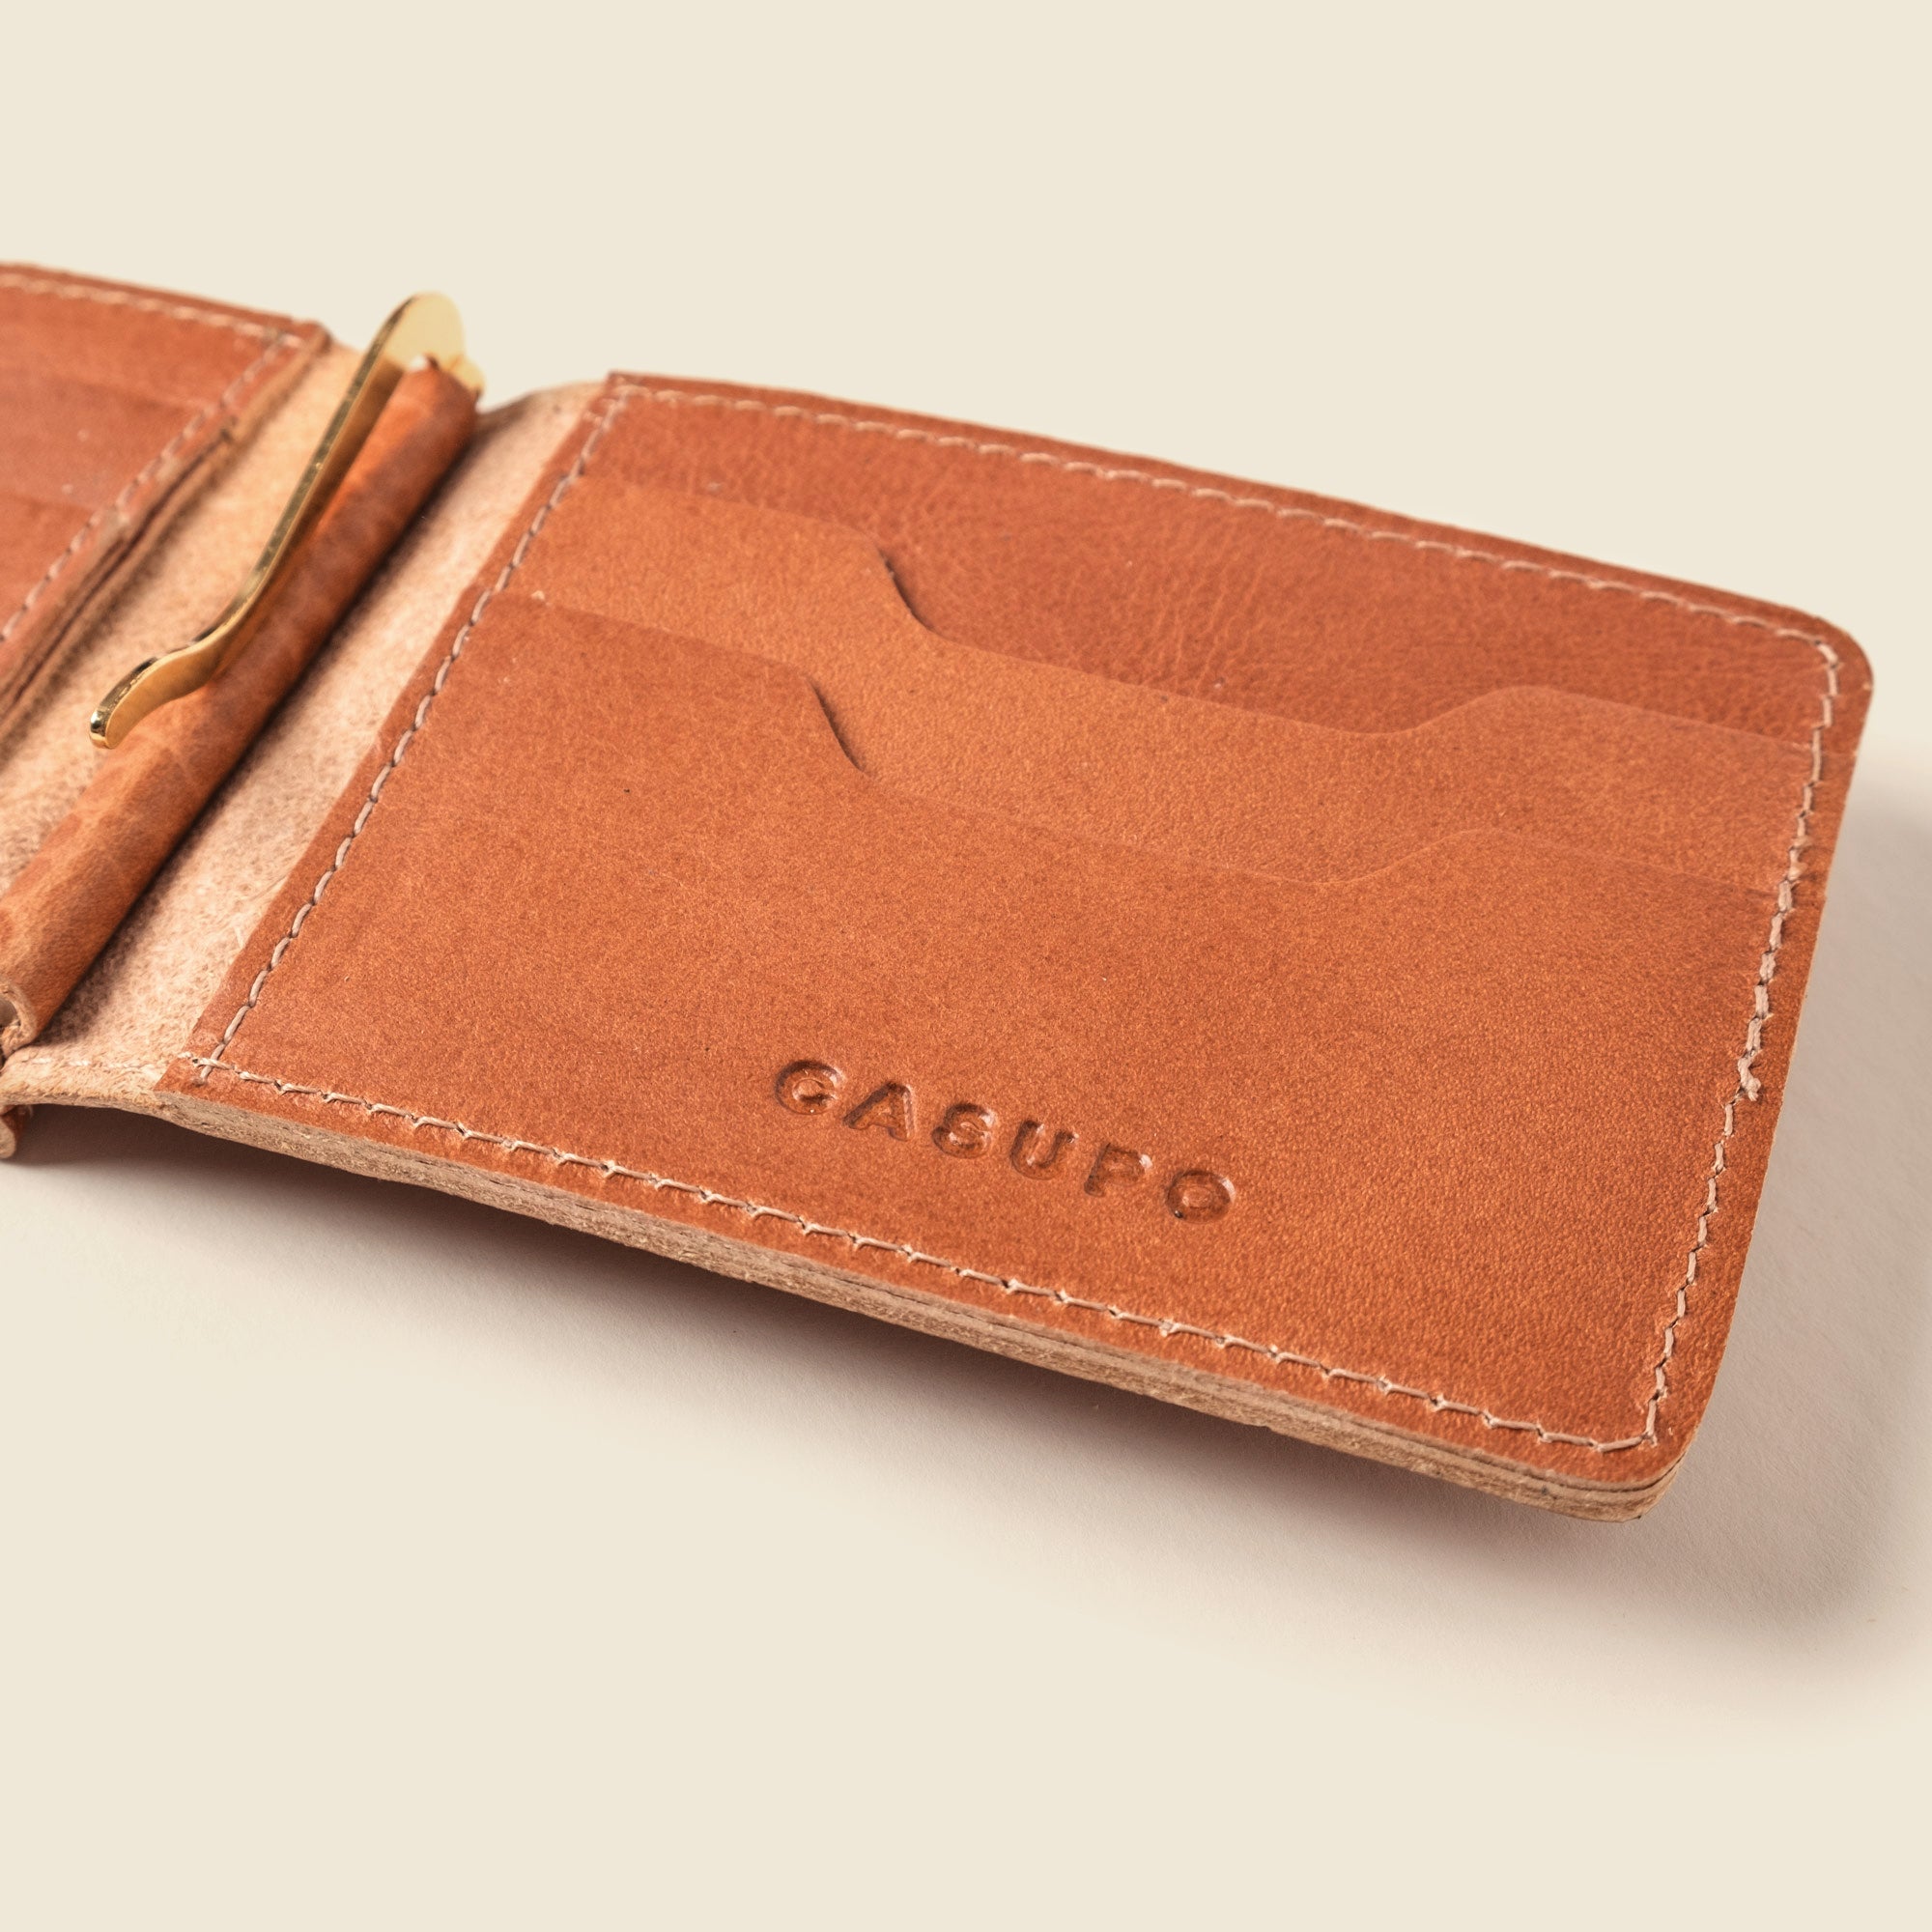 Men's compact leather wallet for travel